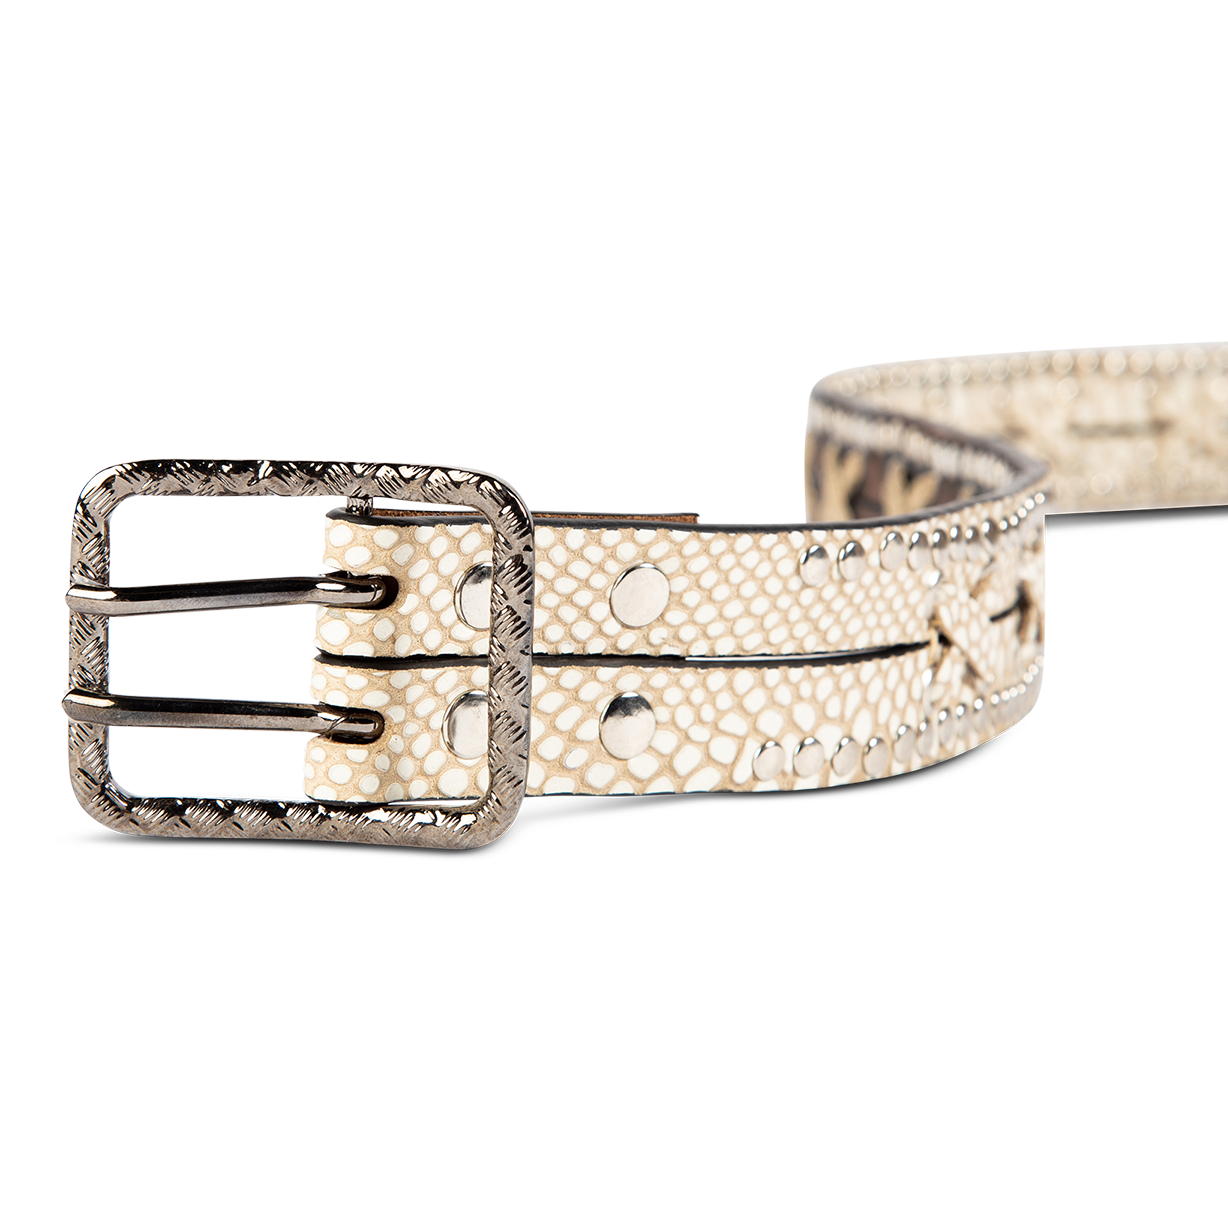 Cross white snake front view featuring silver hardware, stud detailing, and leather strap cross detailing on FREEBIRD full grain leather belt